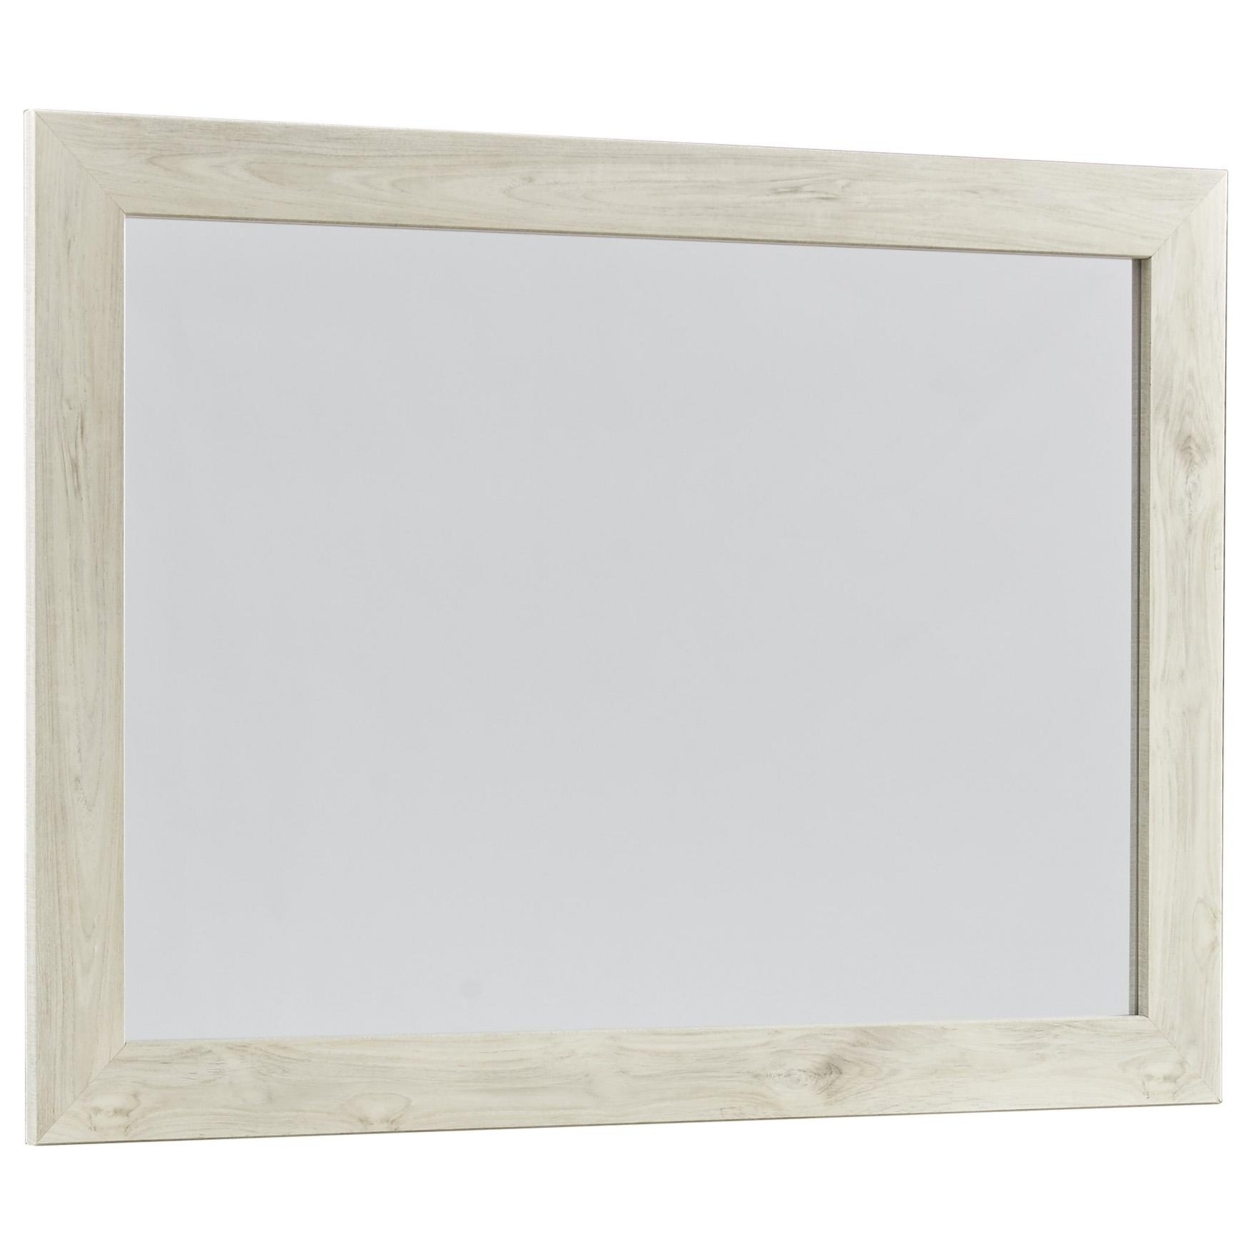 Contemporary Bedroom Mirror With Wood Grain Texture, White And Silver- Saltoro Sherpi